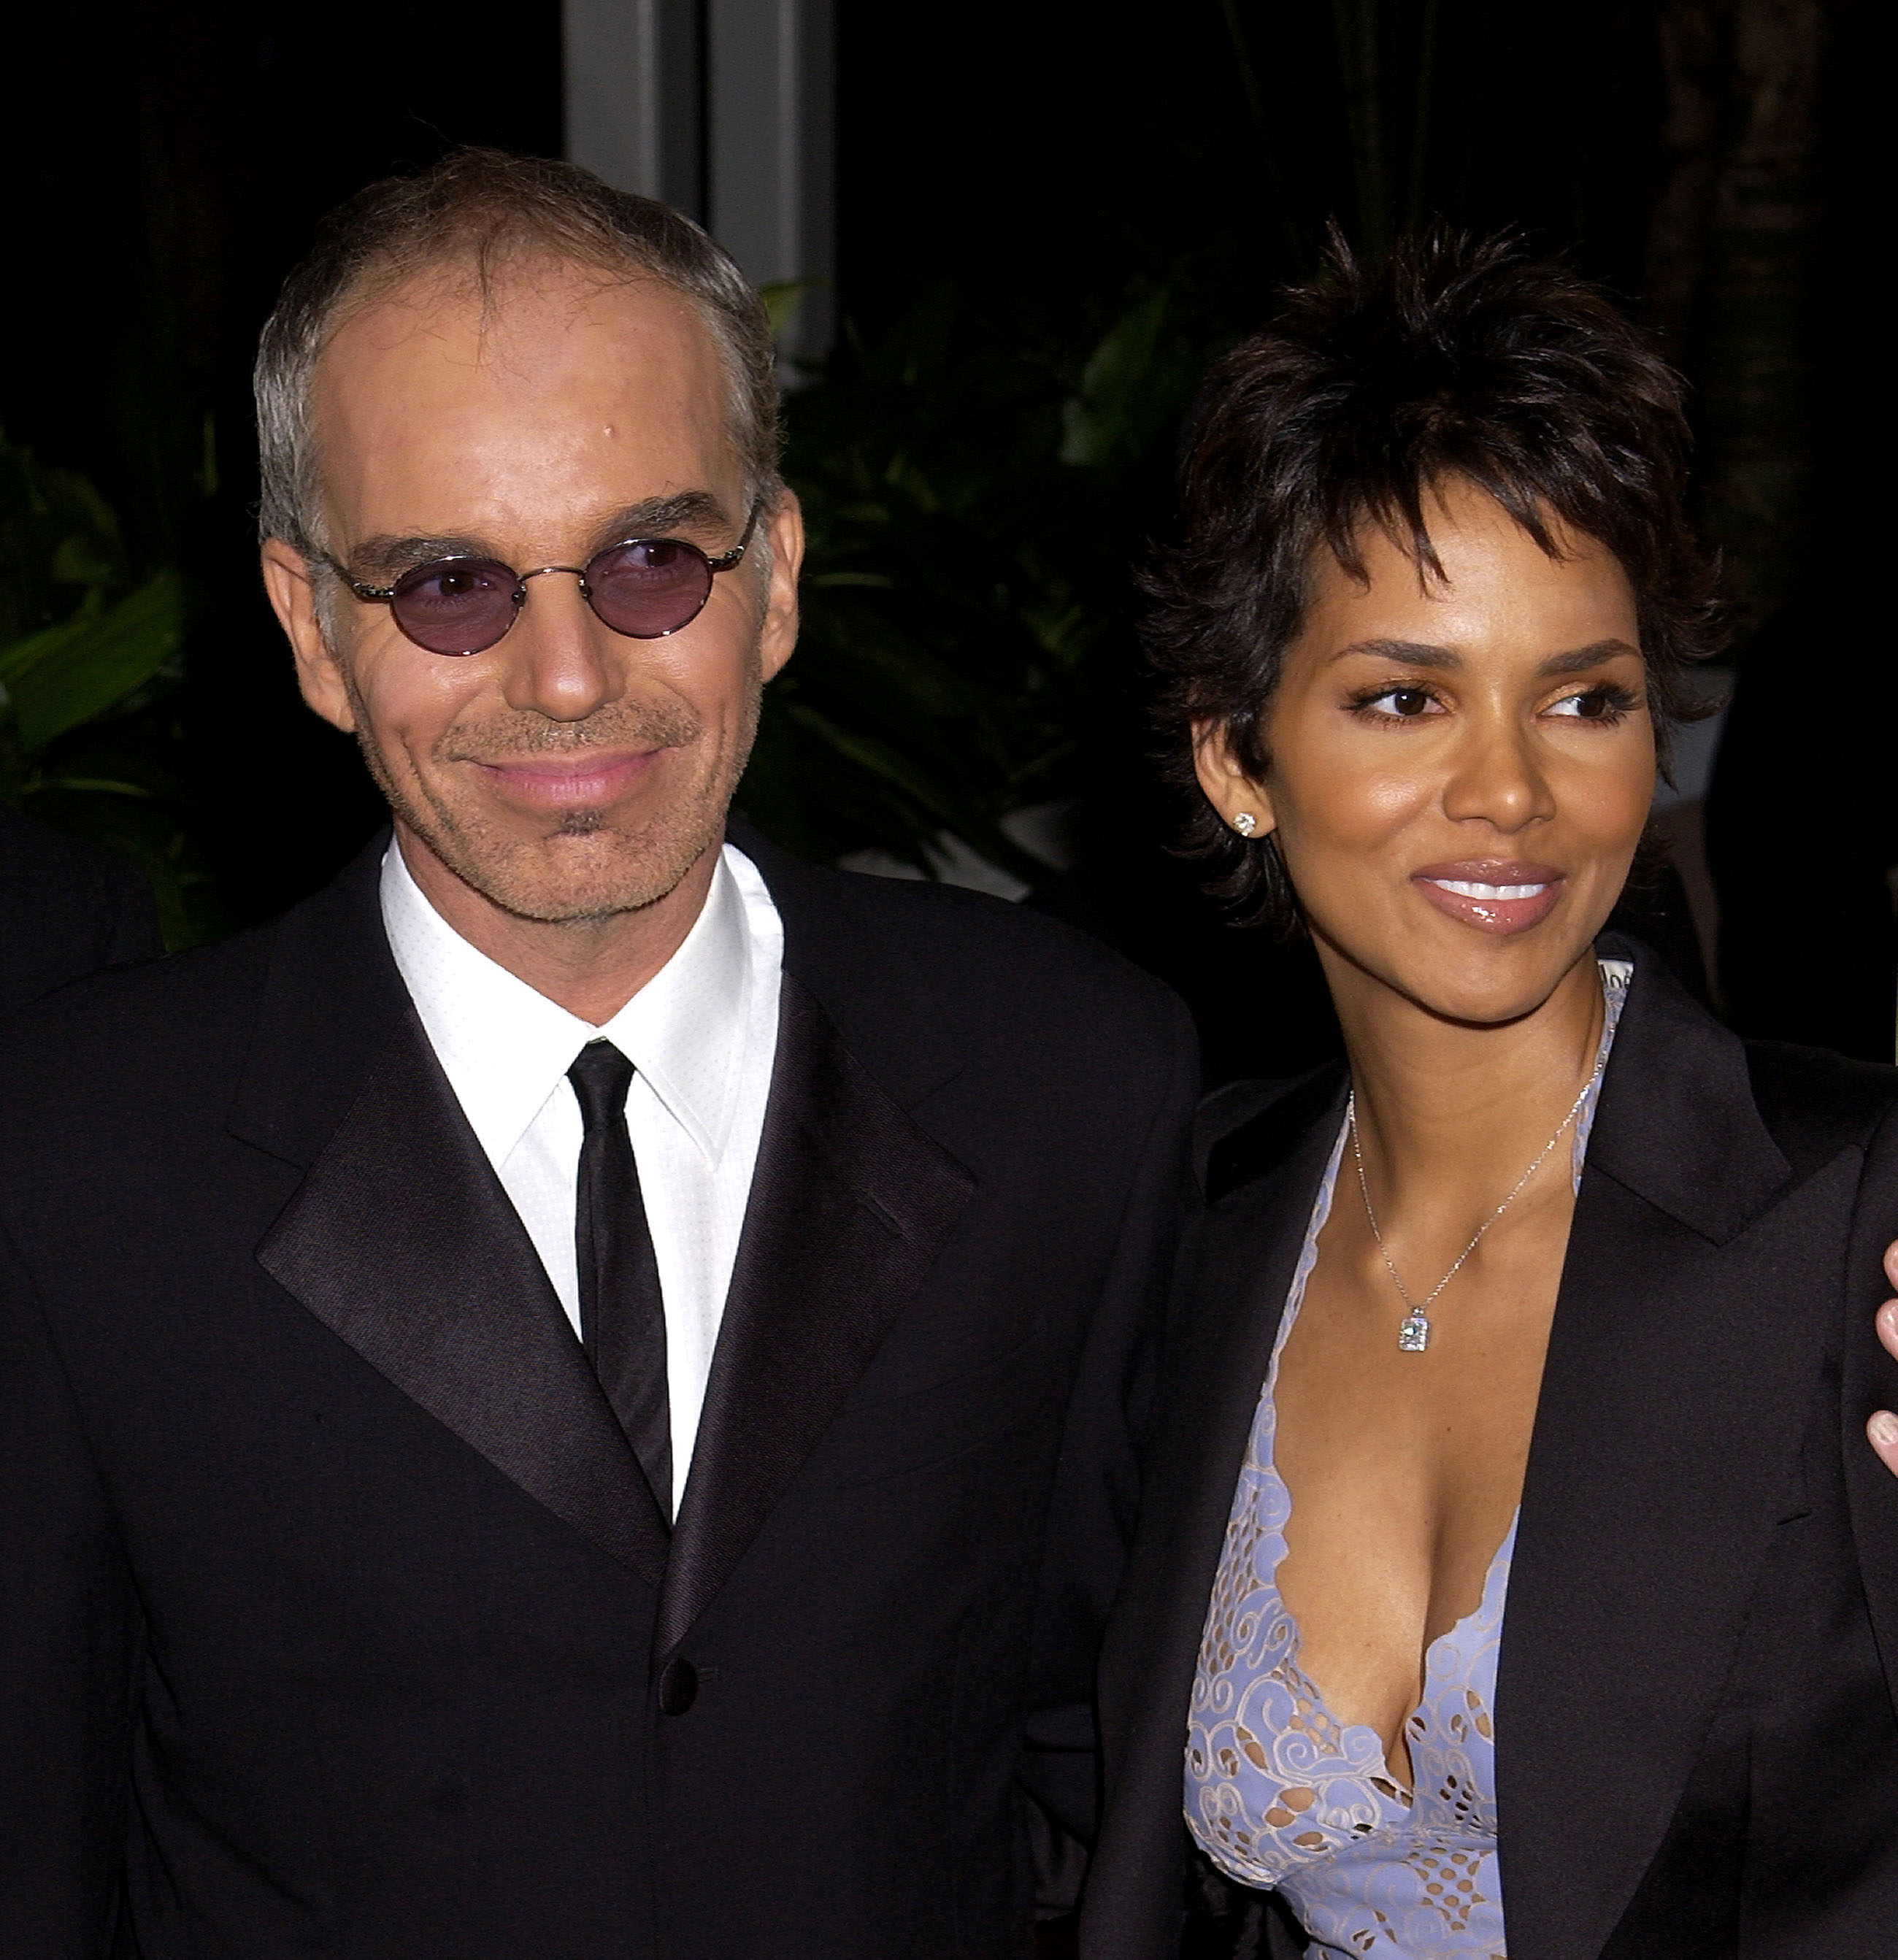 Billy bob thornton and halle berry